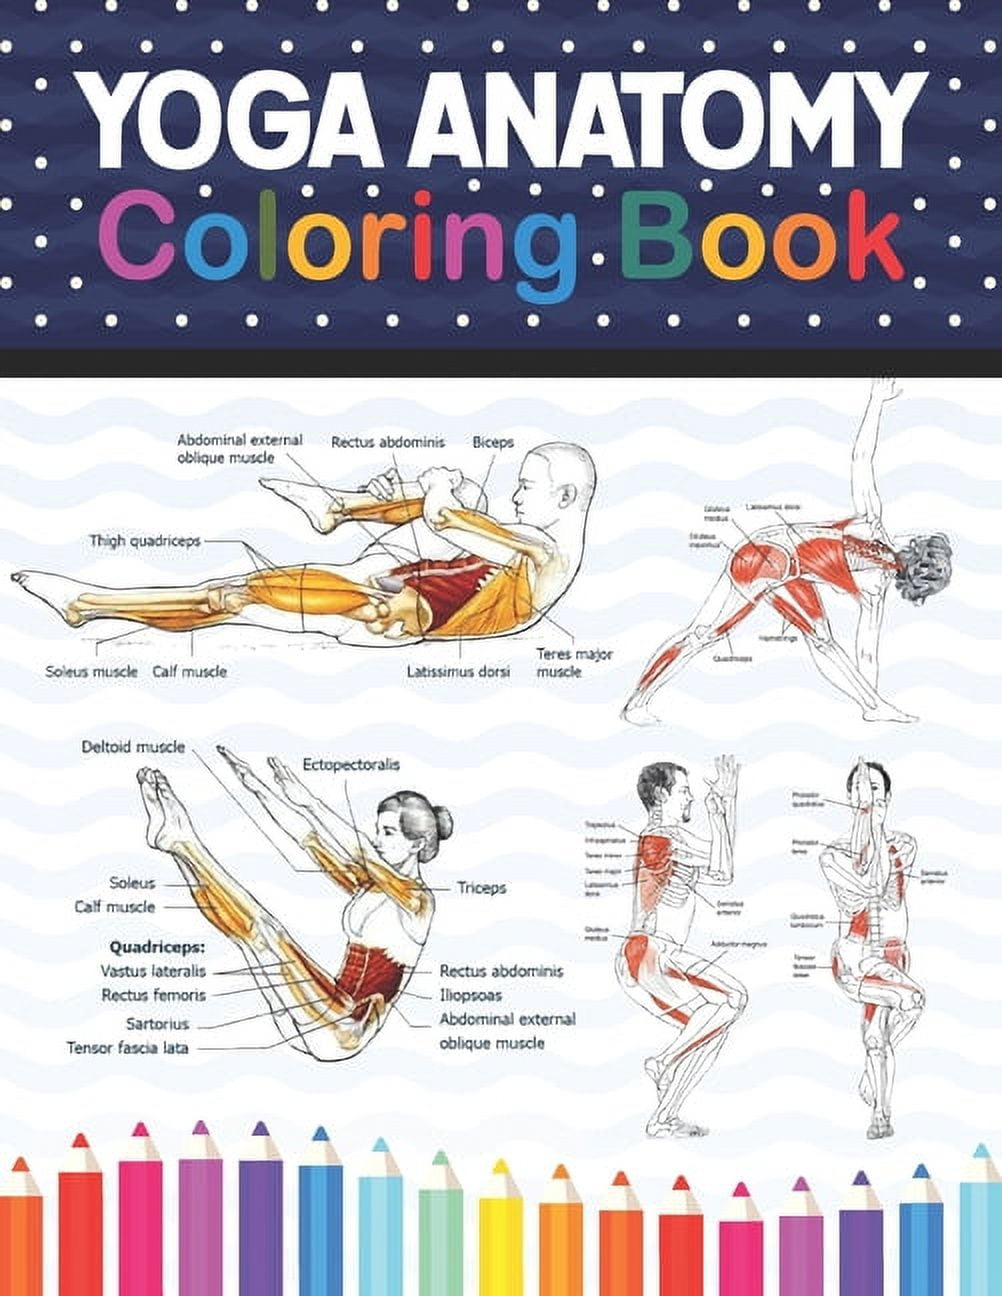 Yoga Anatomy Coloring Book: Collection of Simple Illustrations of Yoga Poses.  Learn the Anatomy and Enhance Your Practice. Human Form and Function ... -  Publication, Shikaylene - Walmart.com